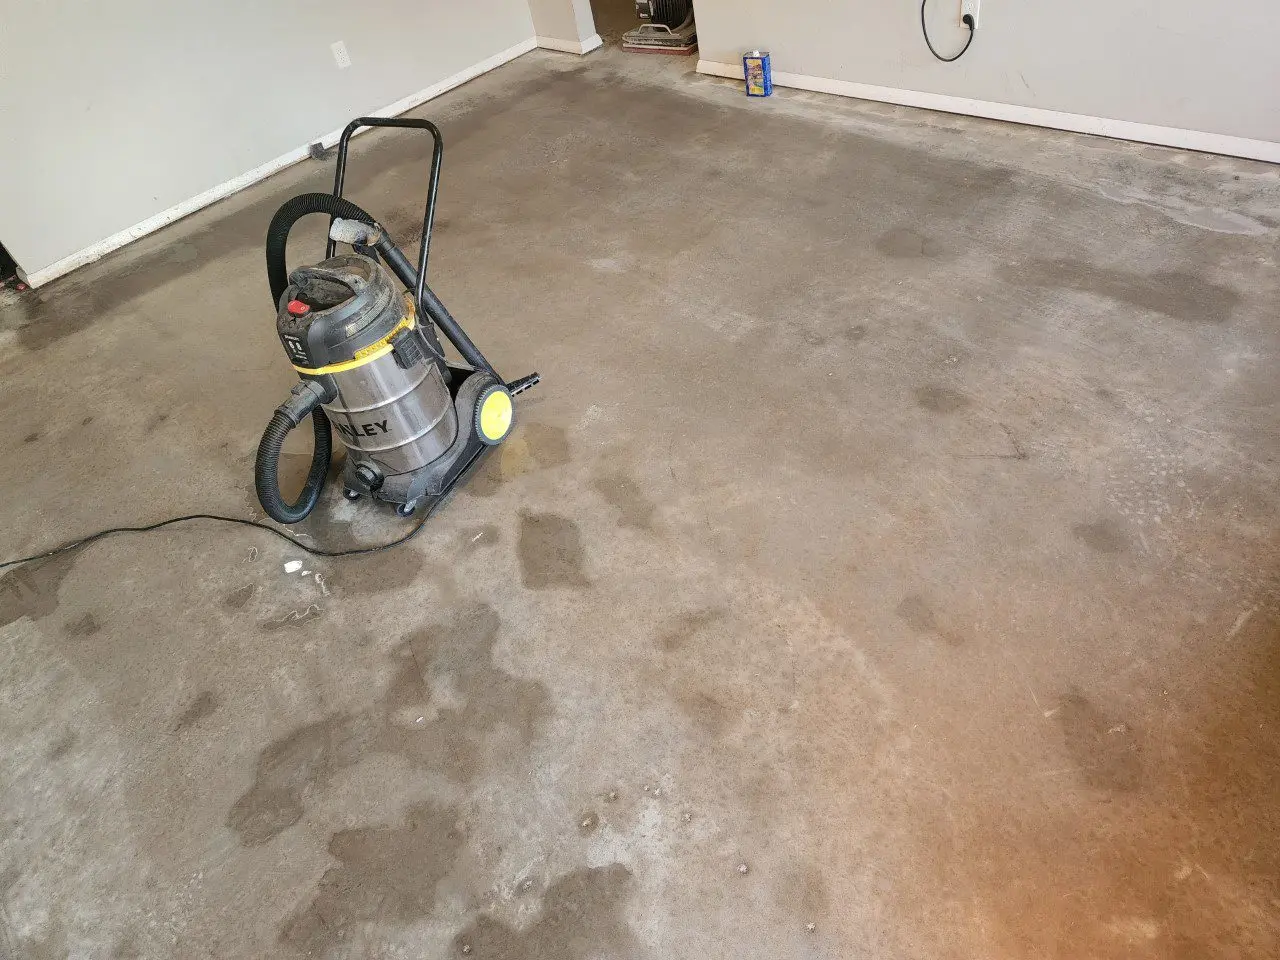 A clean and dry concrete floor achieved using a wet-vac.